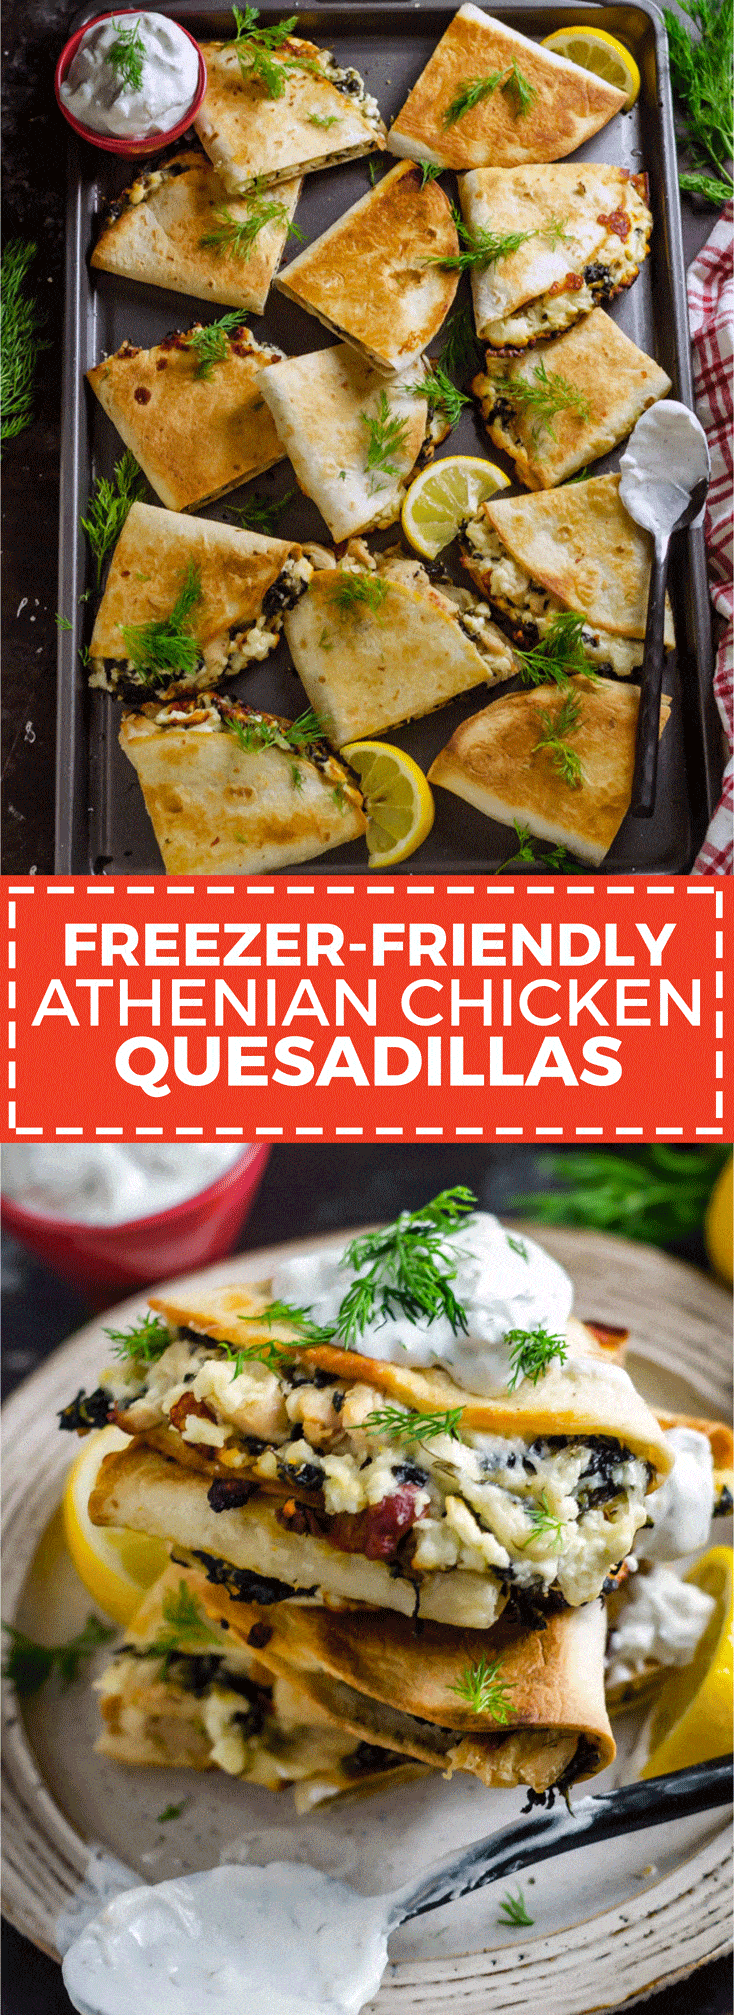 Freezer-Friendly Athenian Chicken Quesadillas. Load these Greek-inspired quesadillas up with tangy marinated chicken, bacon, feta and mozzarella cheeses, and spinach, and then dig in... or save them for later! Great for meal prep. | hostthetoast.com